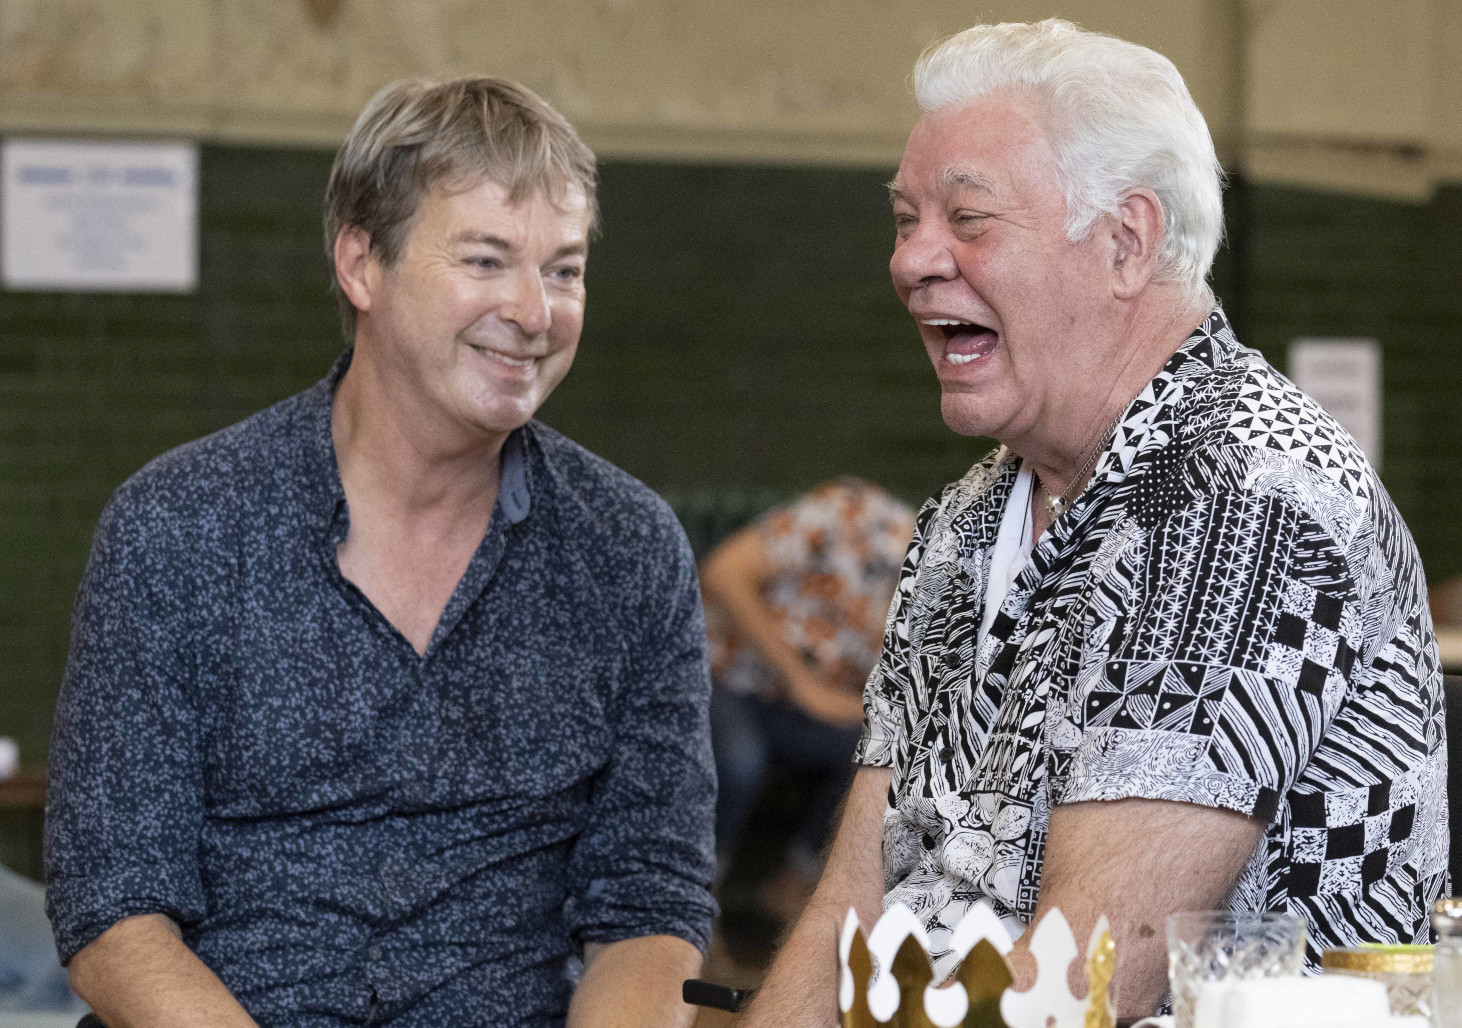 Julian Clary and Matthew Kelly who star in THE DRESSER